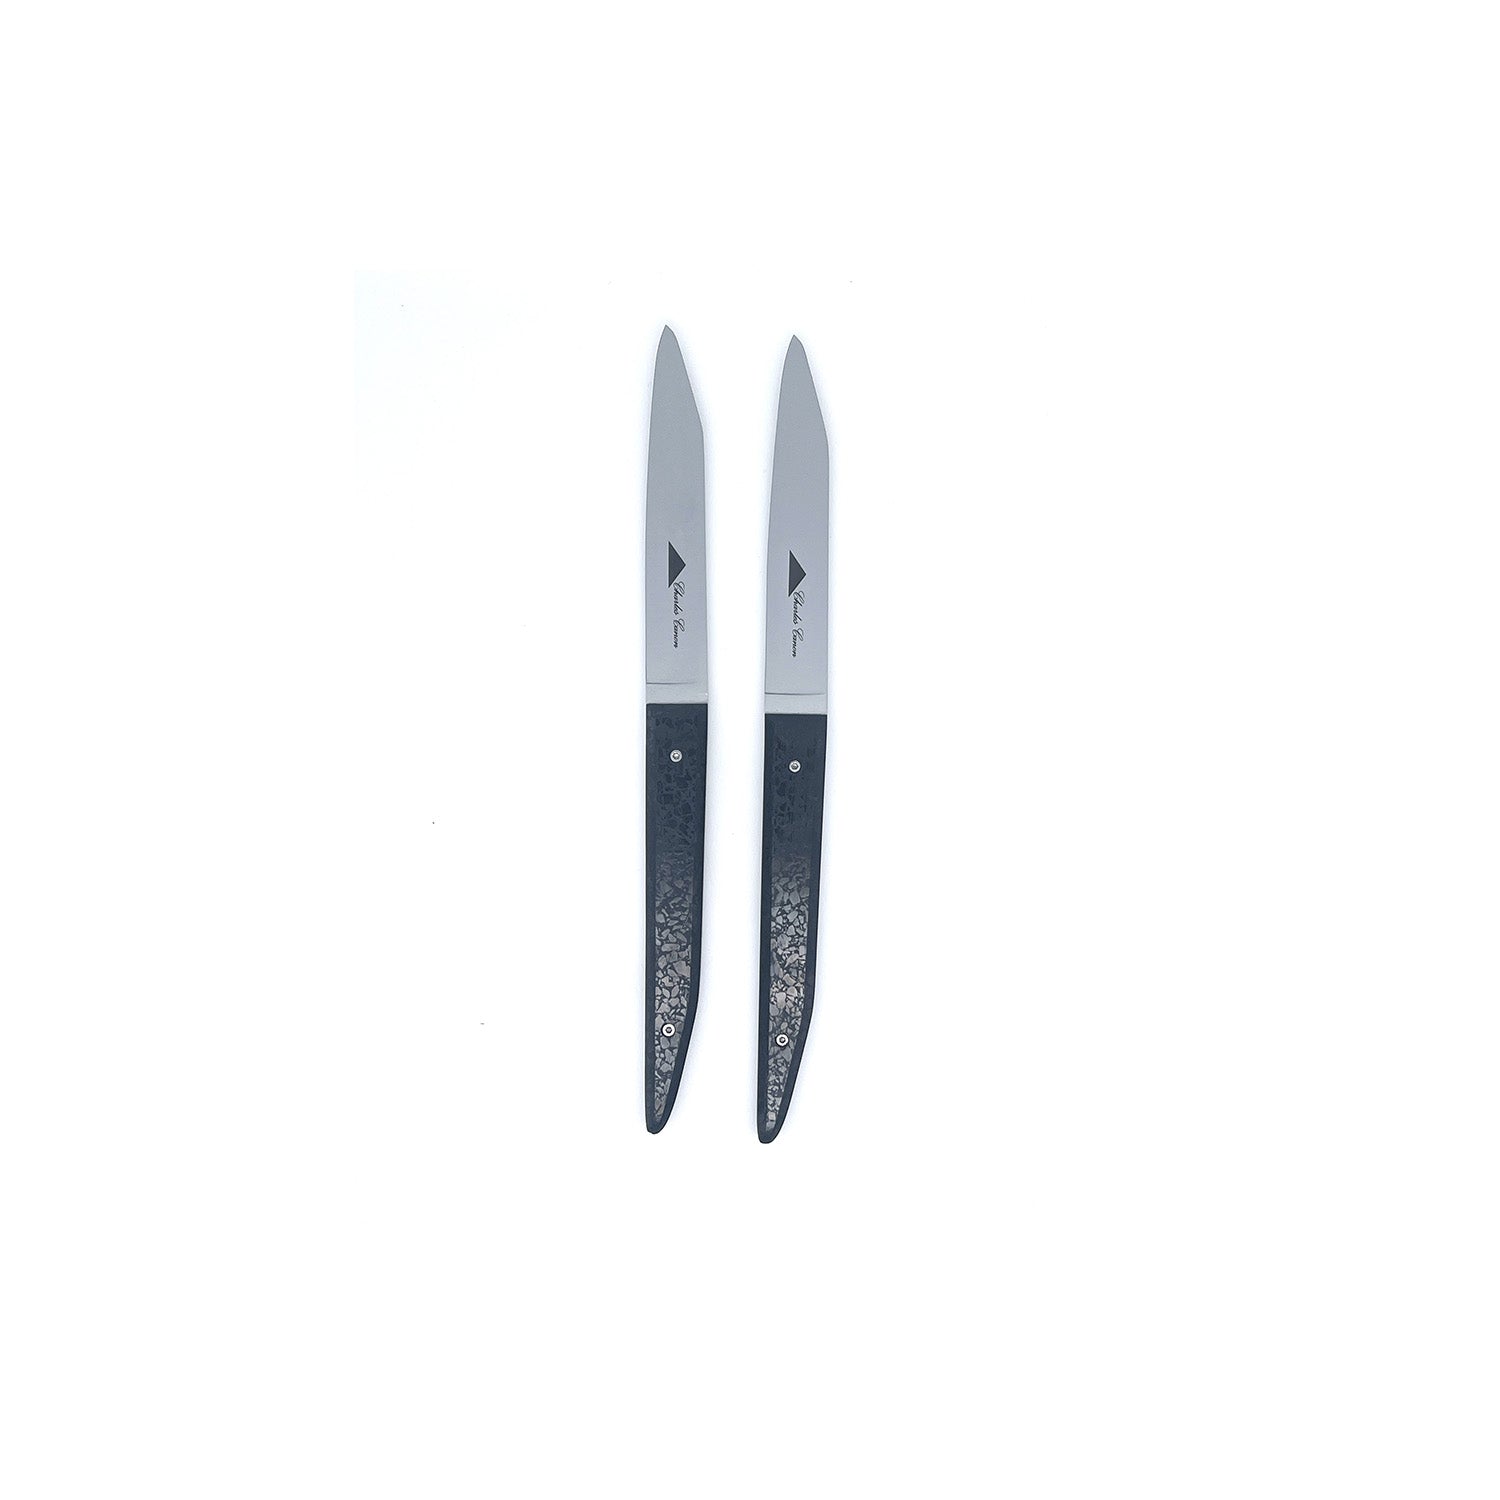 Duo box: 2 table knives with polished charcoal handles